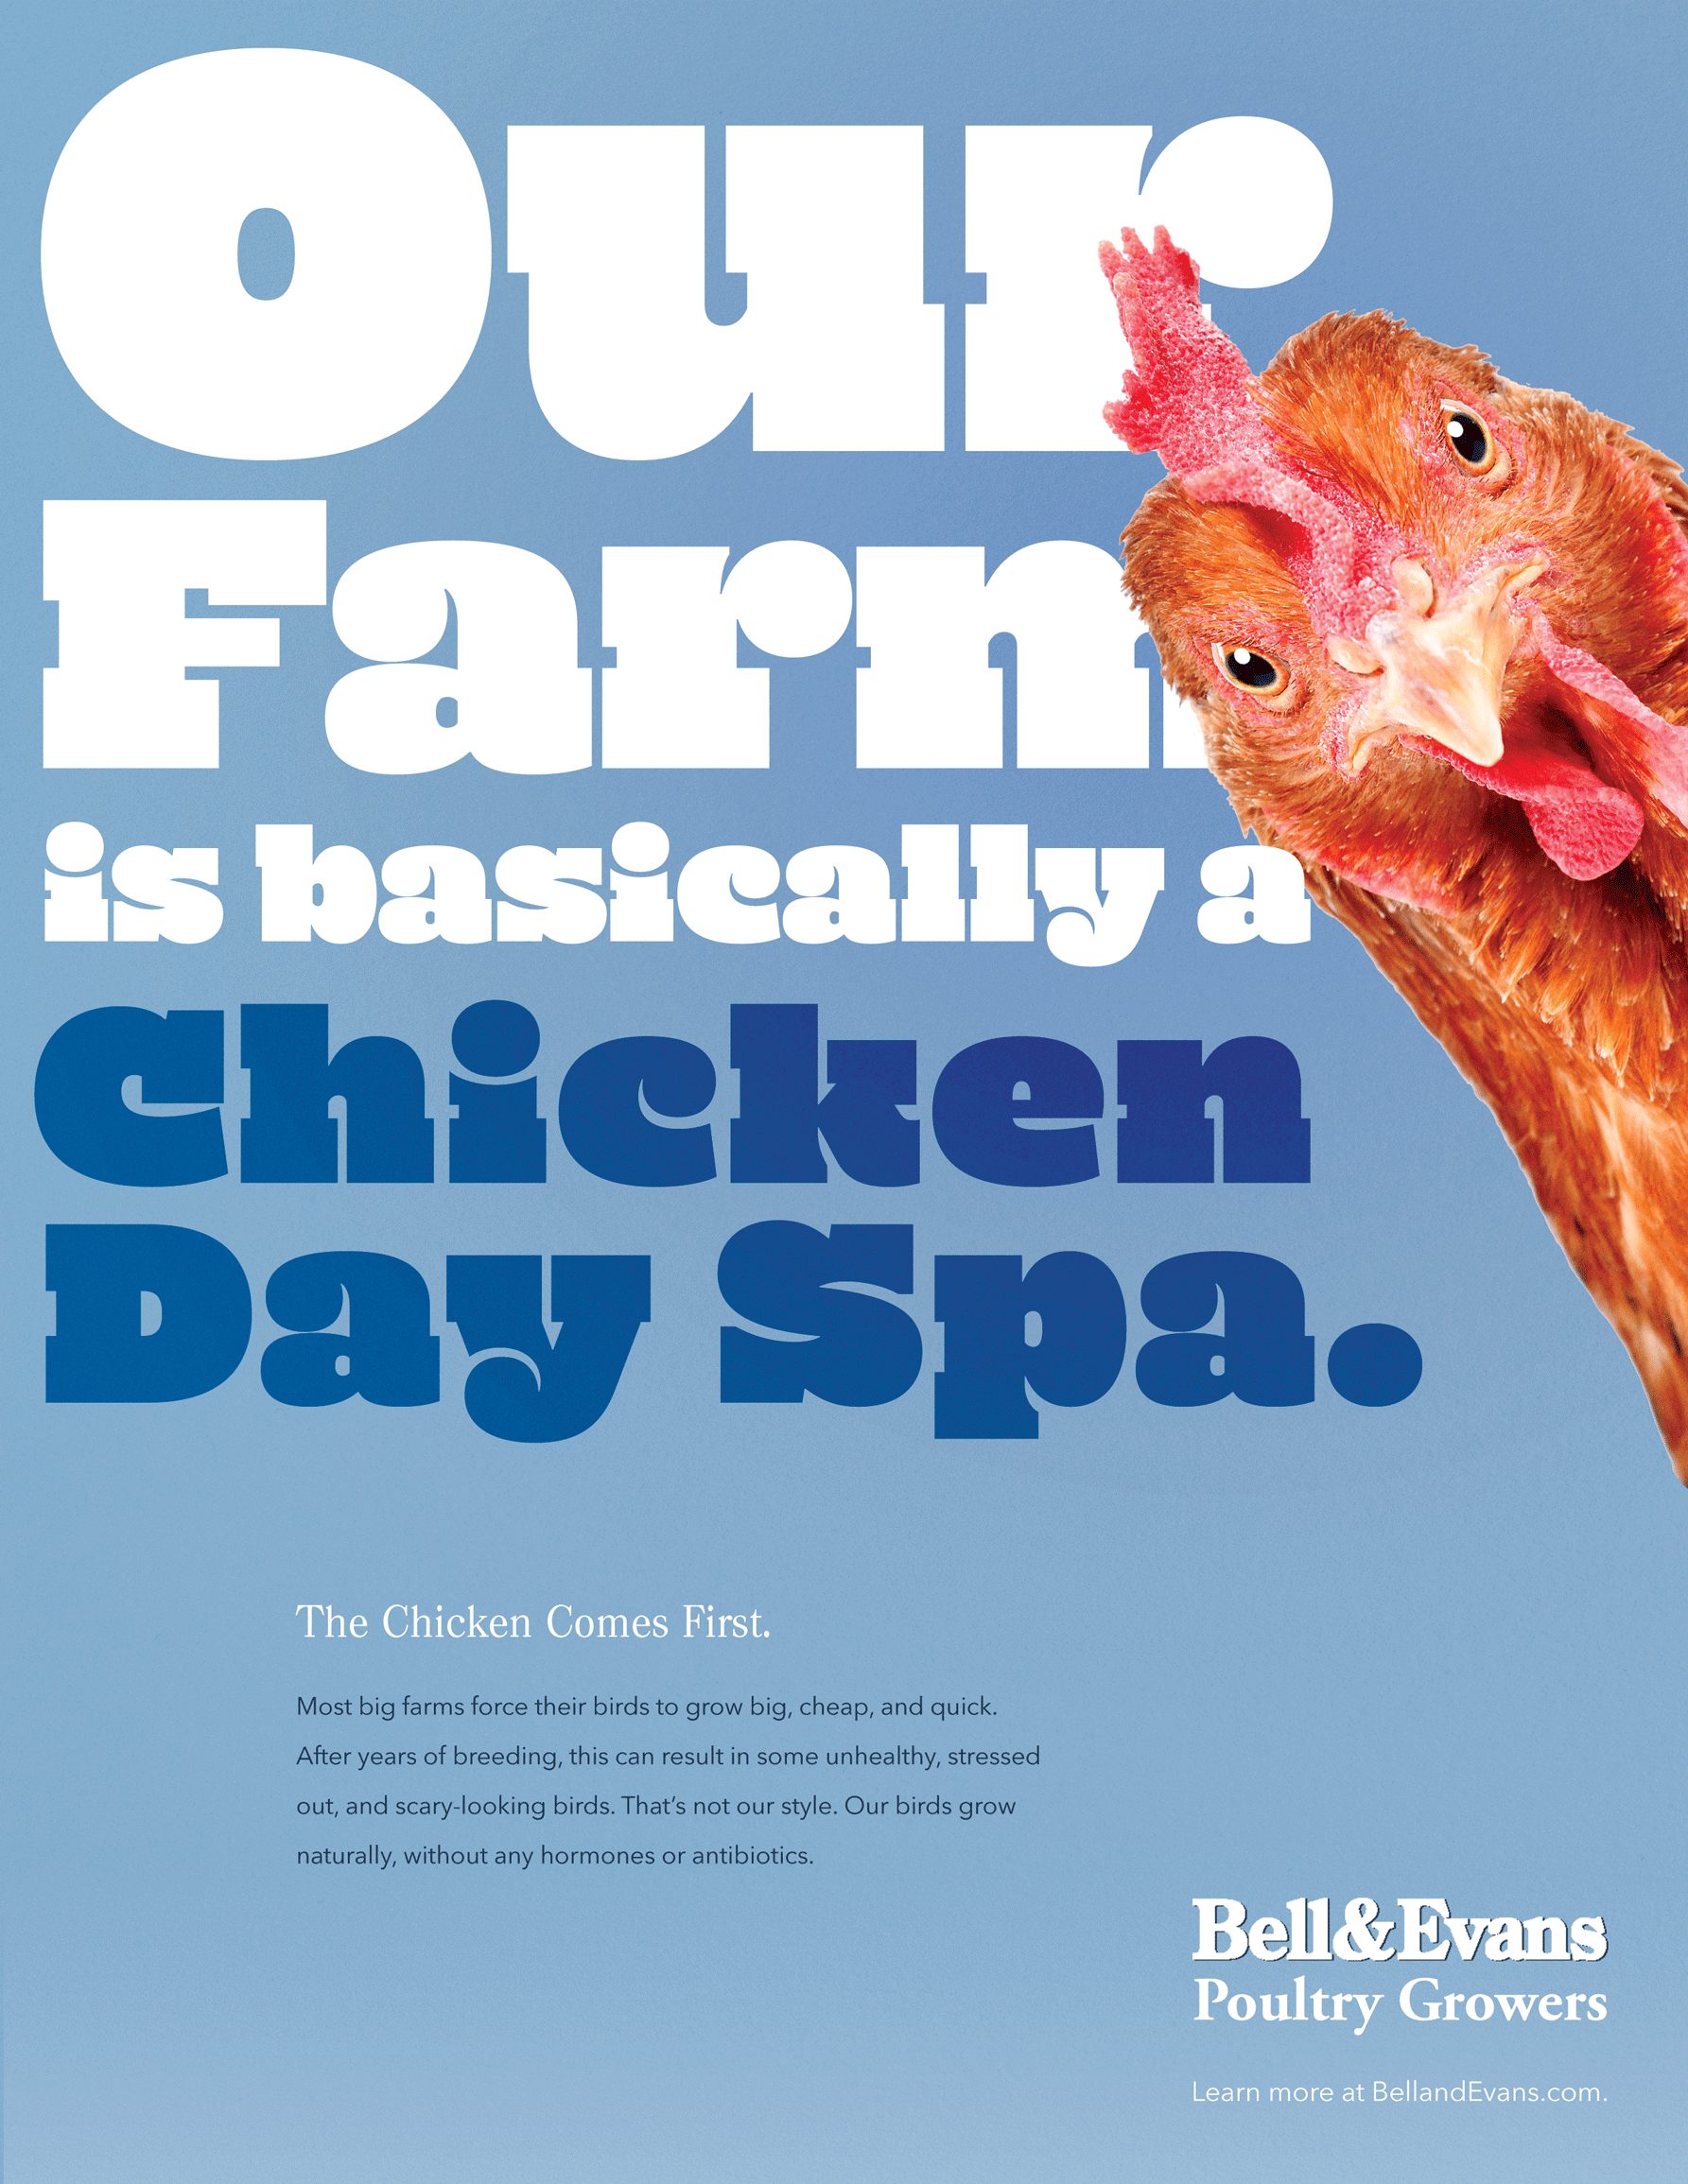 Our farm is basically a chicken day spa.